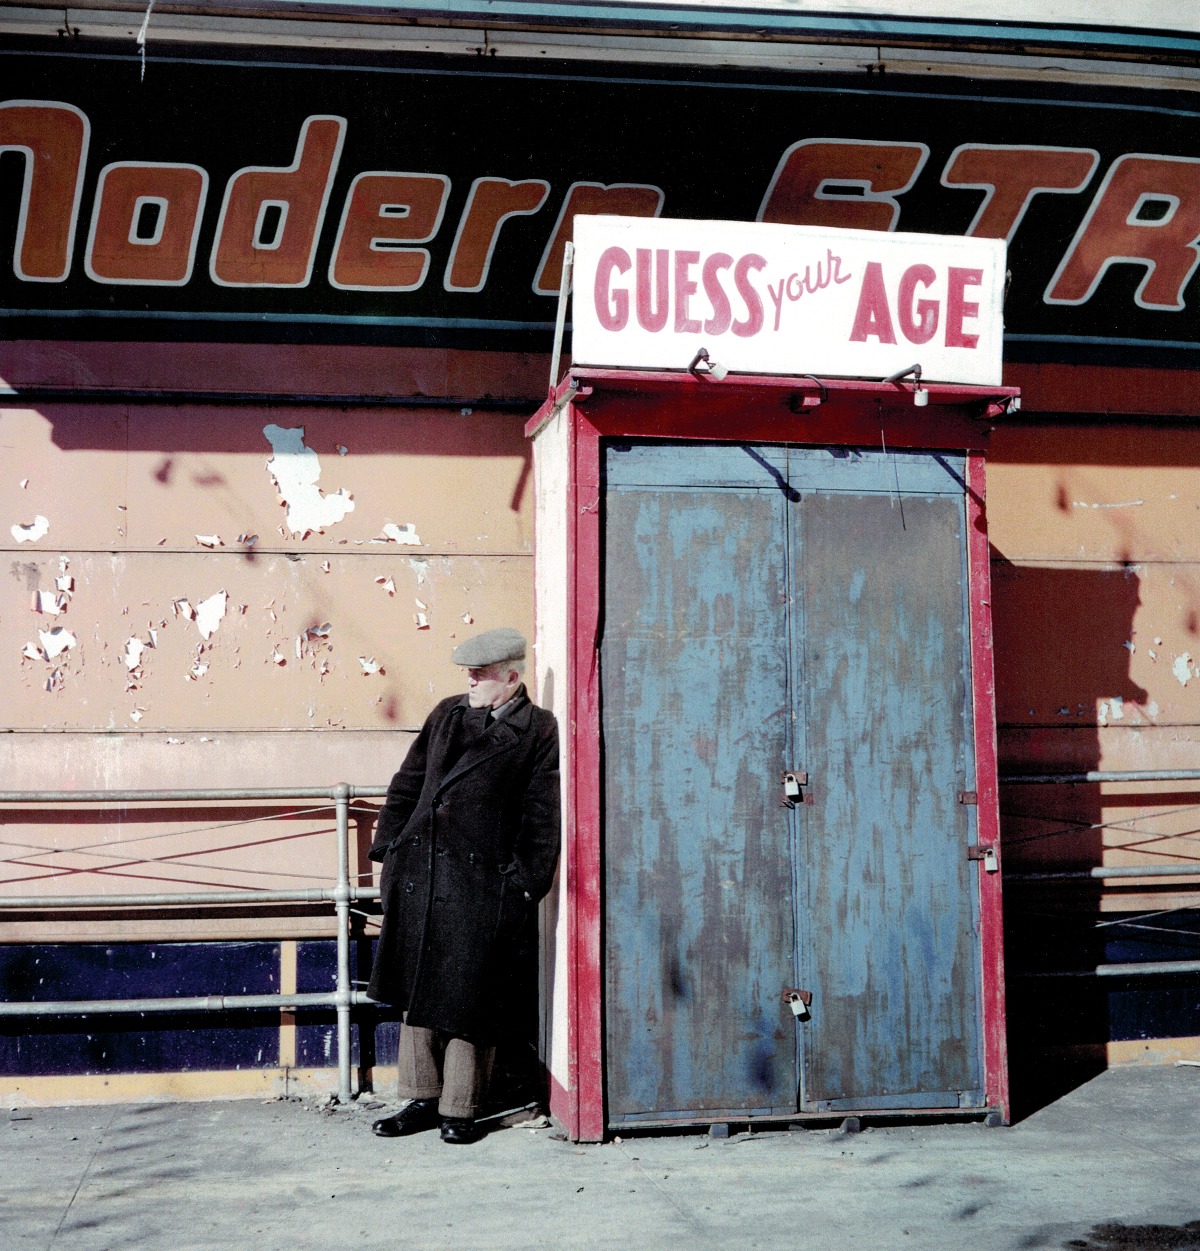 "Guess Your Age", East Harlem, New York, 1947